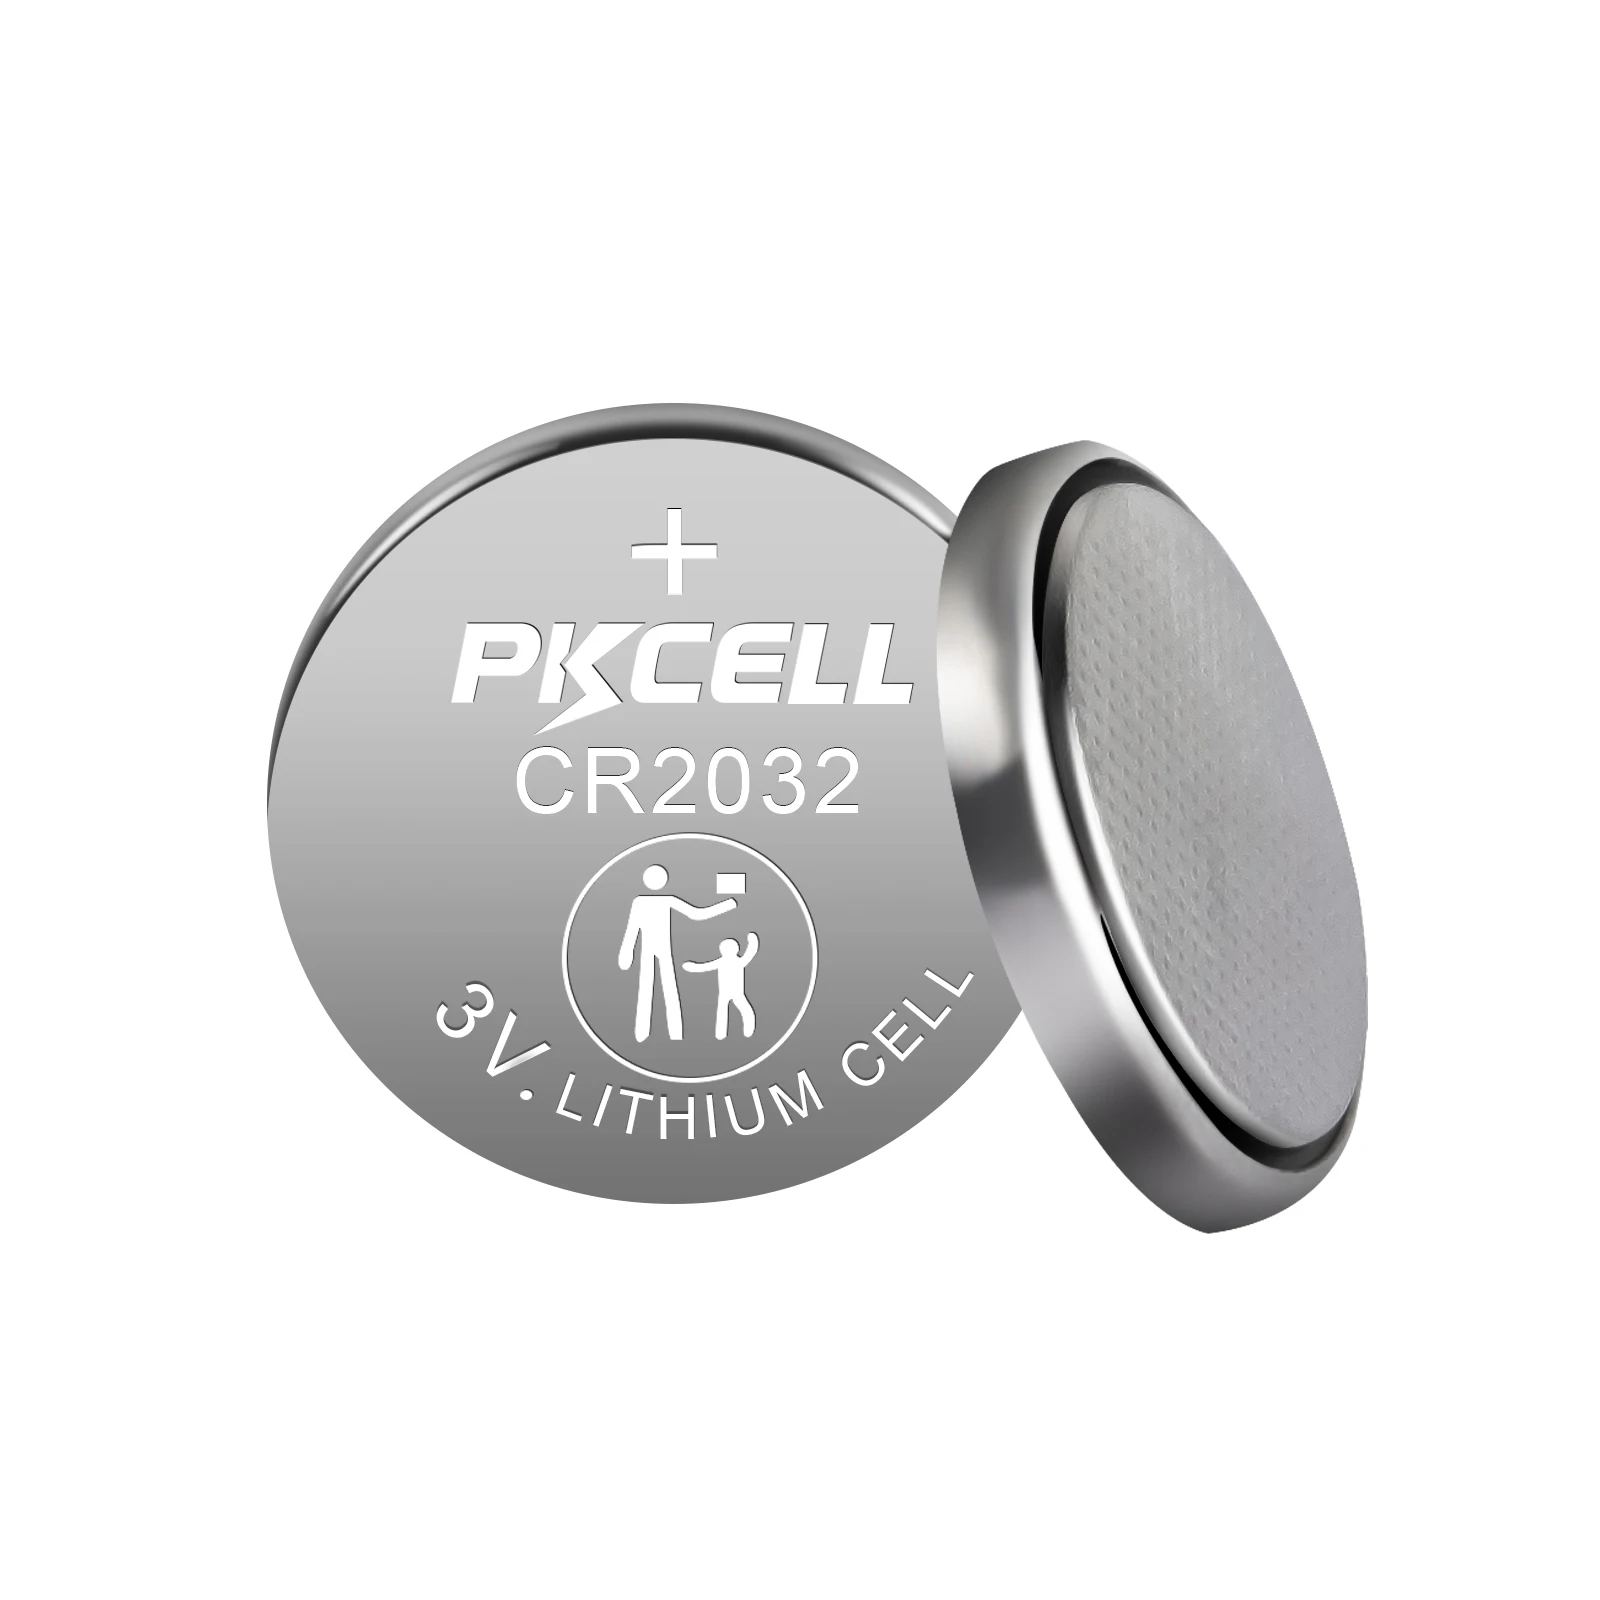 forklædt mest Andre steder Wholesale Cr2032 Cr2025 Cr2016 Non Rechargeable Primary Batteries 3v Button  Cell Lithium Battery For Electrical Toys Car Keys - Buy Pkcell Cr2032 Pile  Cr2032 3v Lithium Button Cell Batter Cr2032 Cr2025 Watch